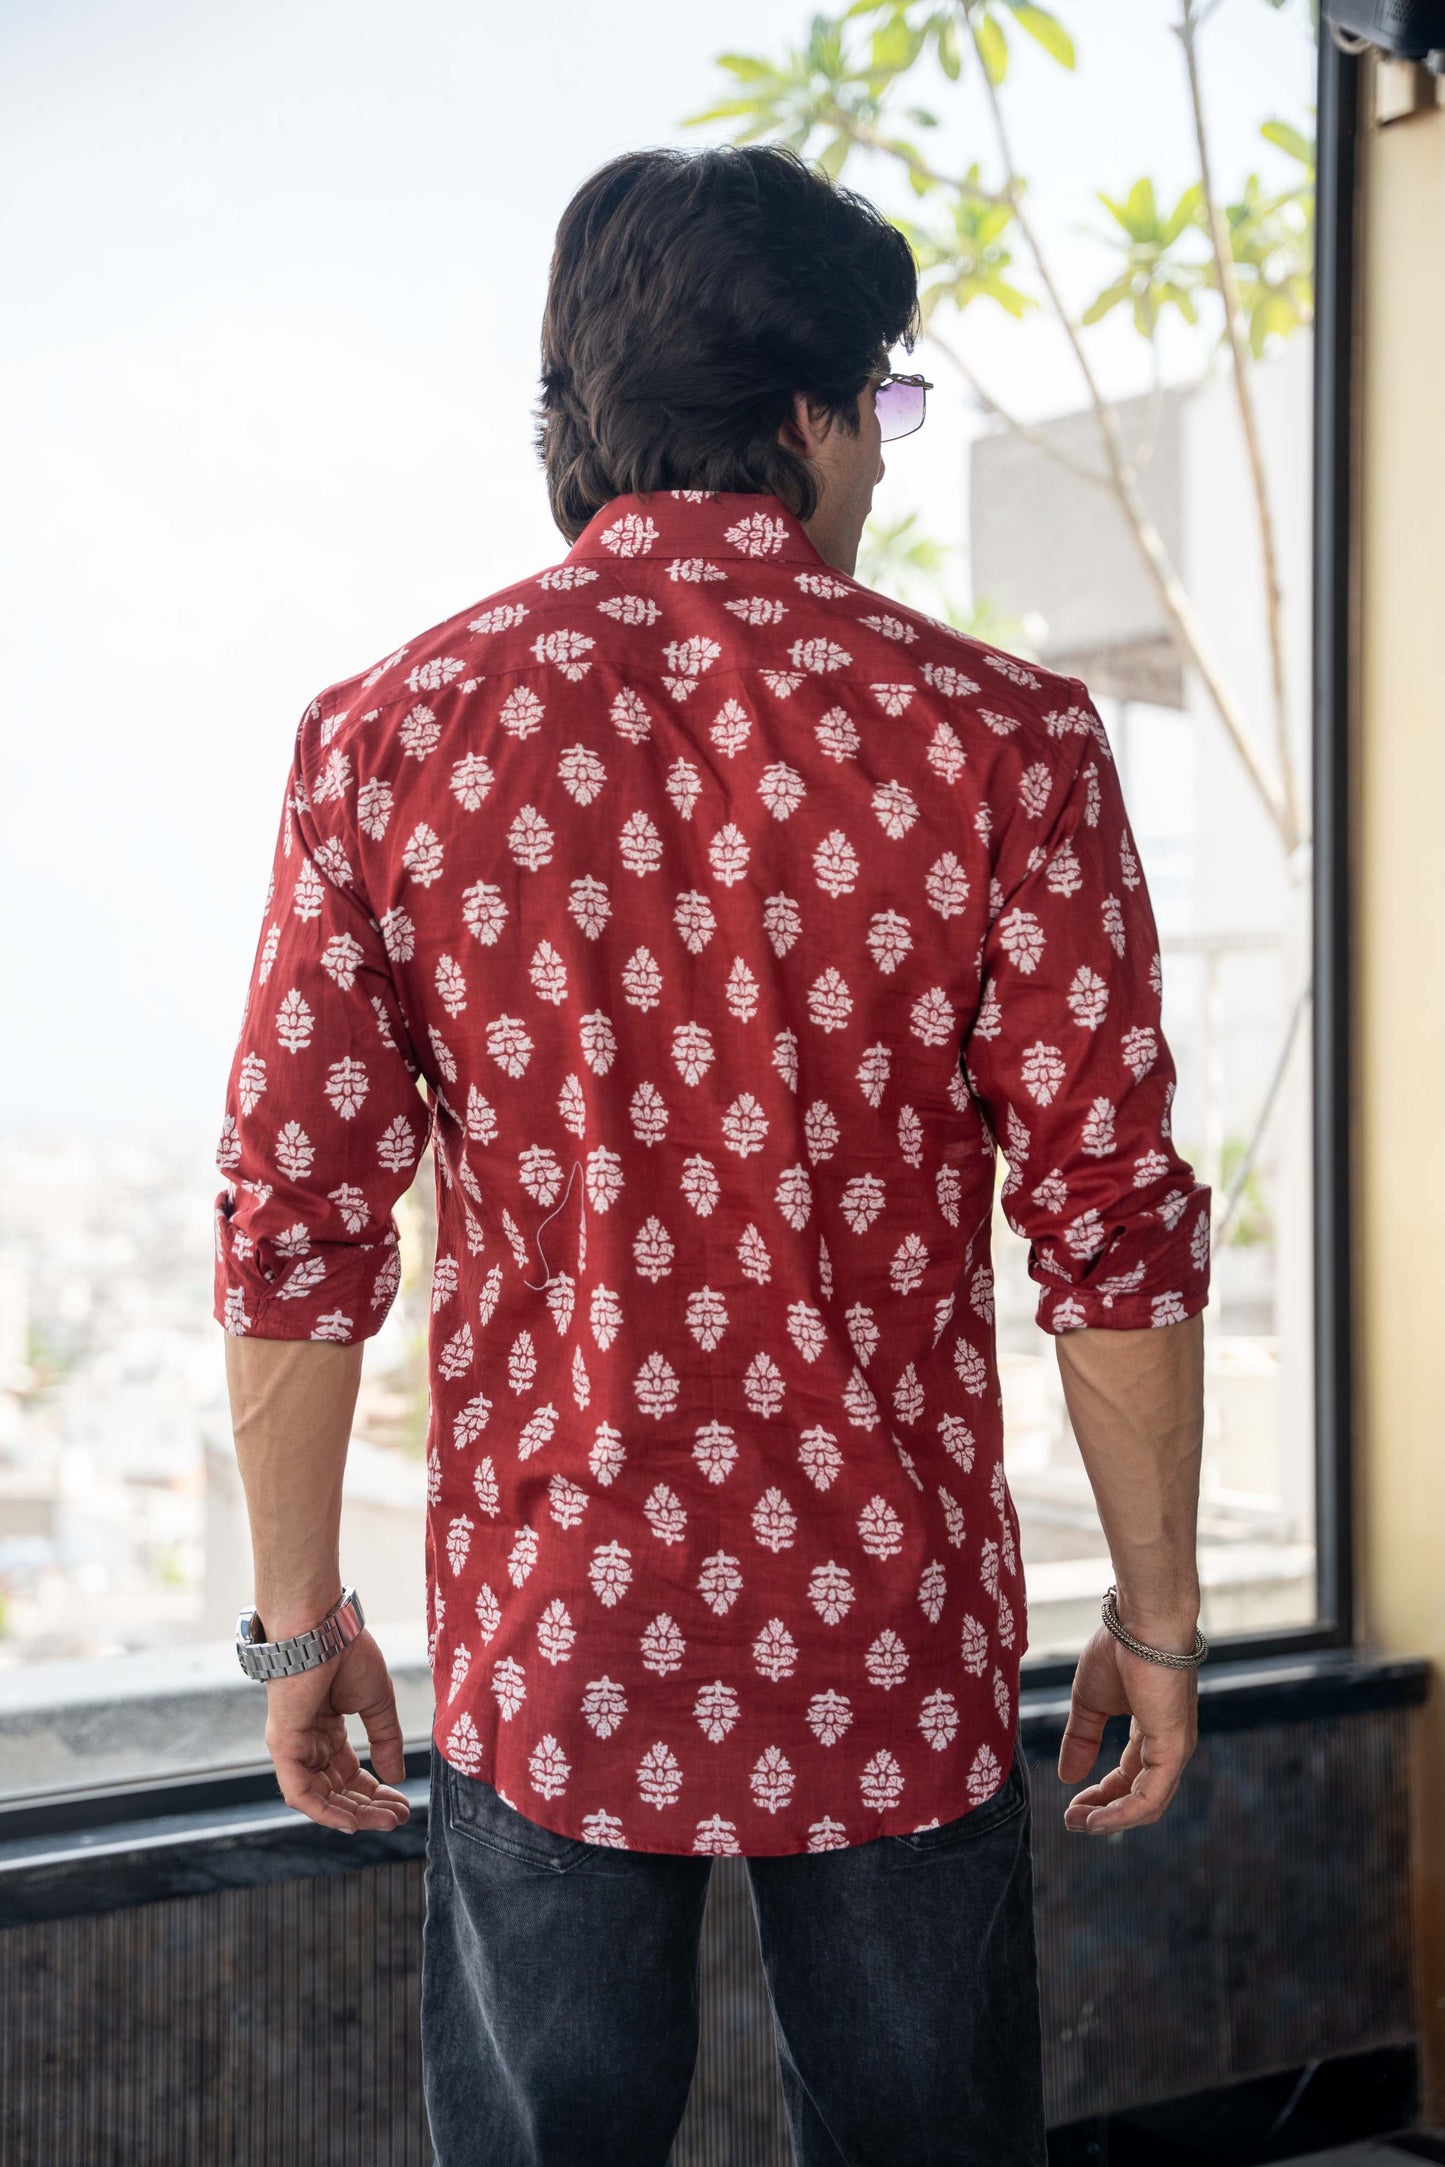 The Blood Red Shirt With White Flower Print